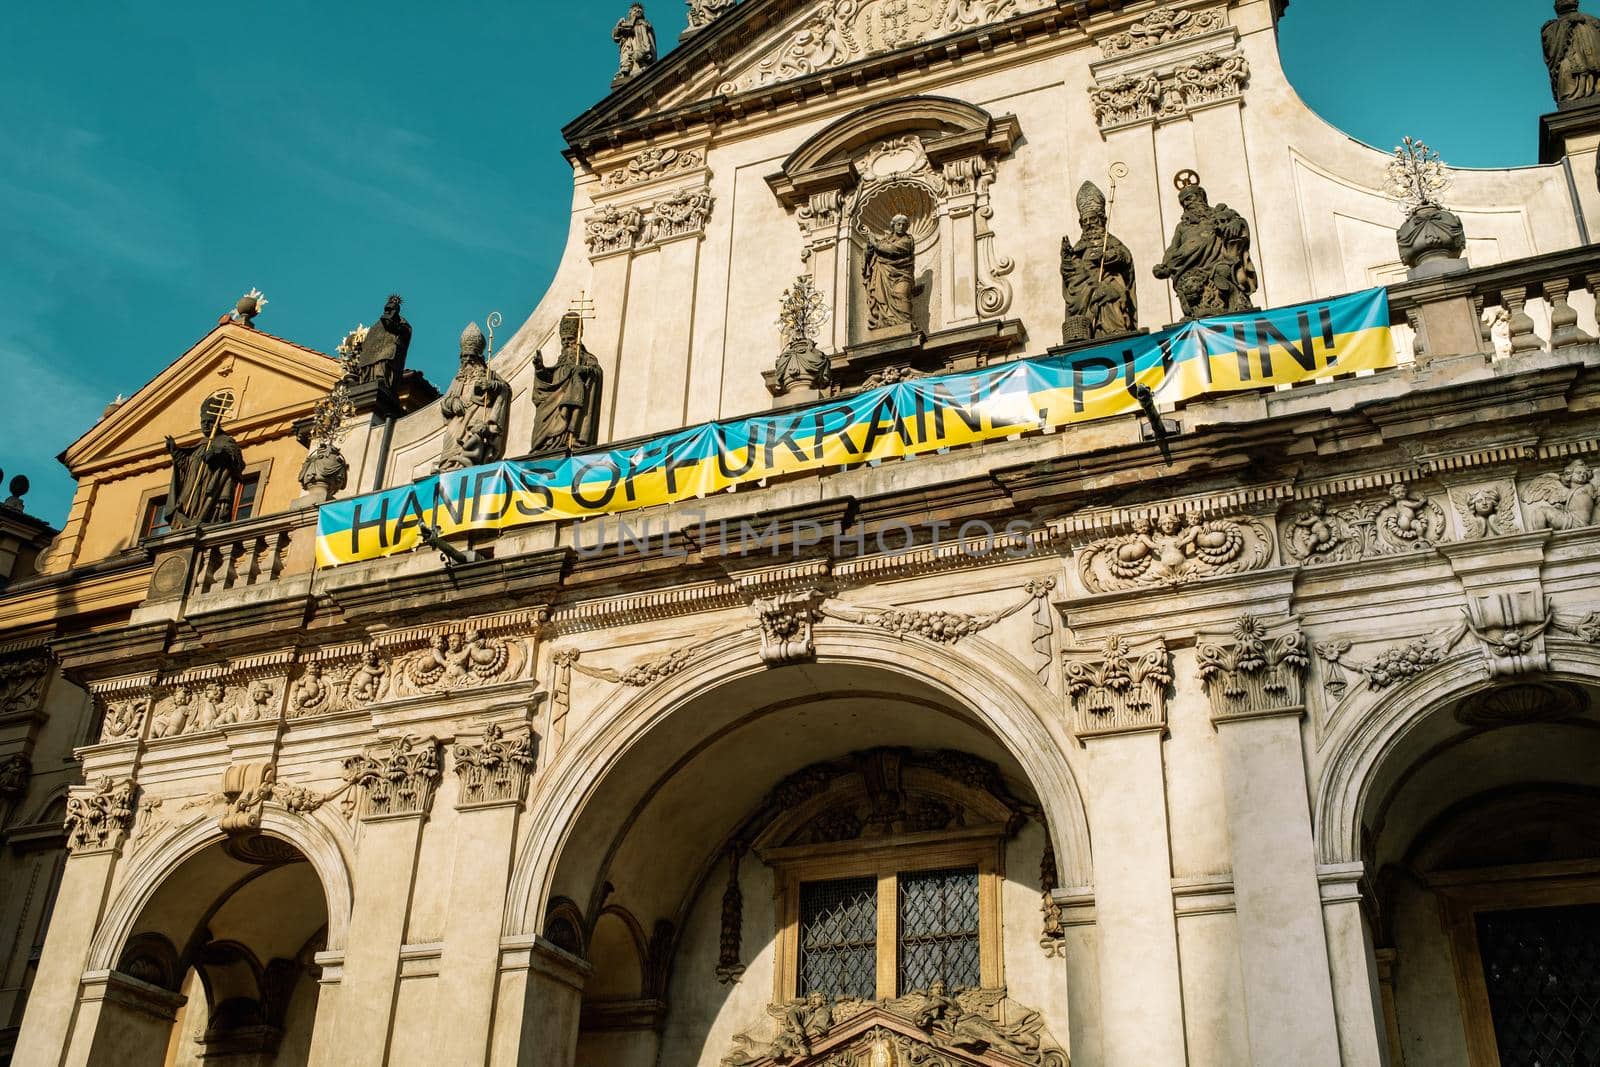 Church of St. Salvator with hands off Ukraine putin sign on facade in support. Historic complex Clementinum. Baroque details architecture. High quality photo